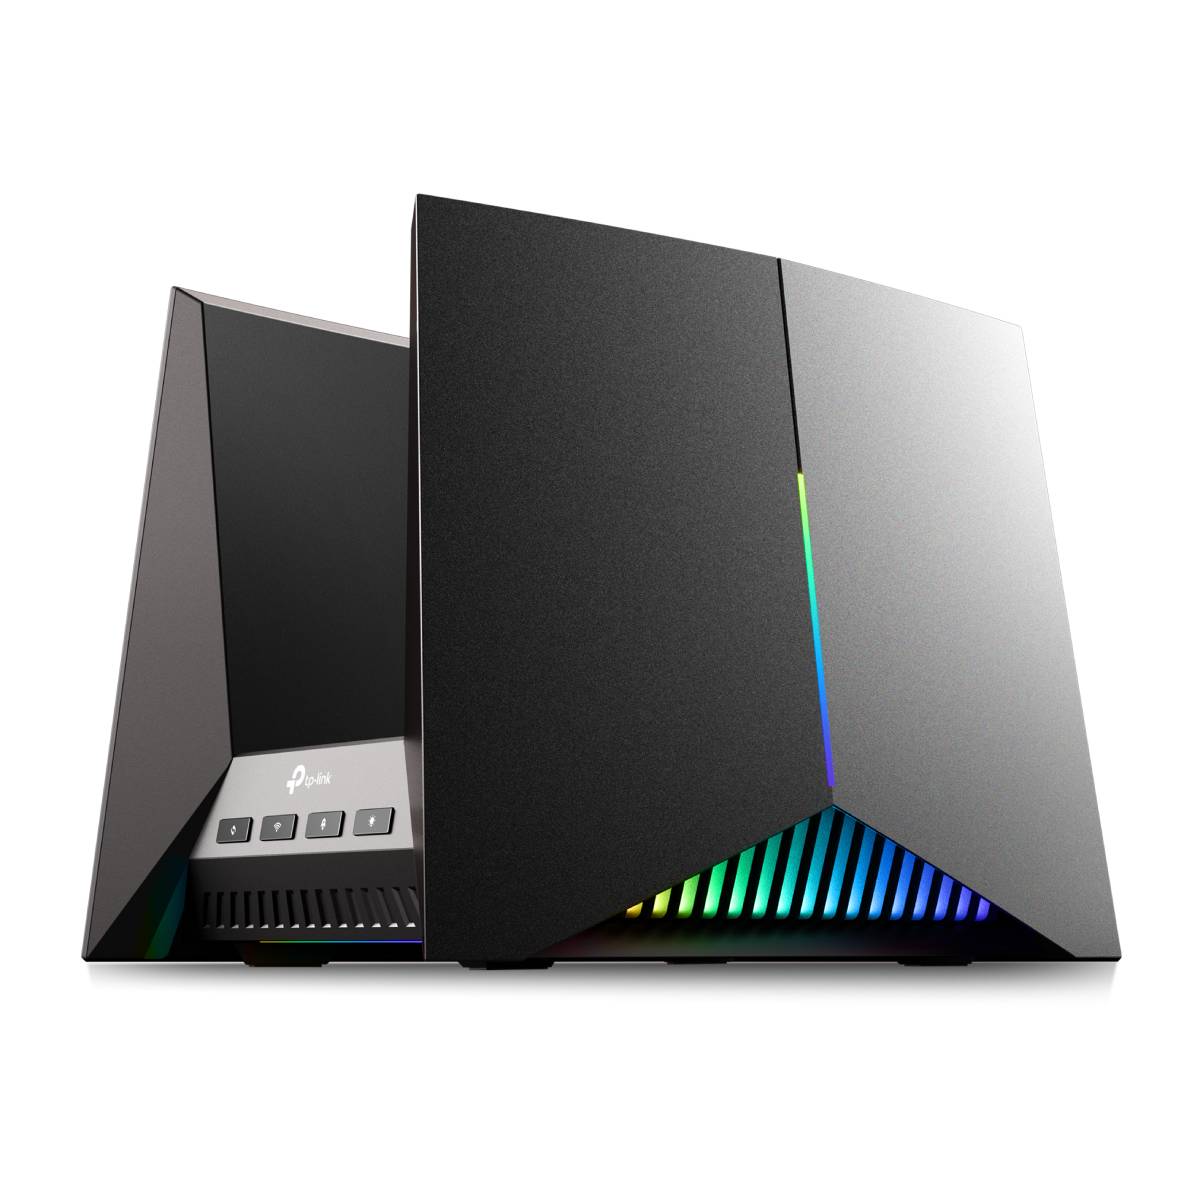 TP-Link Archer GE800 - BE19000 Tri-Band WiFi 7 Gaming Router